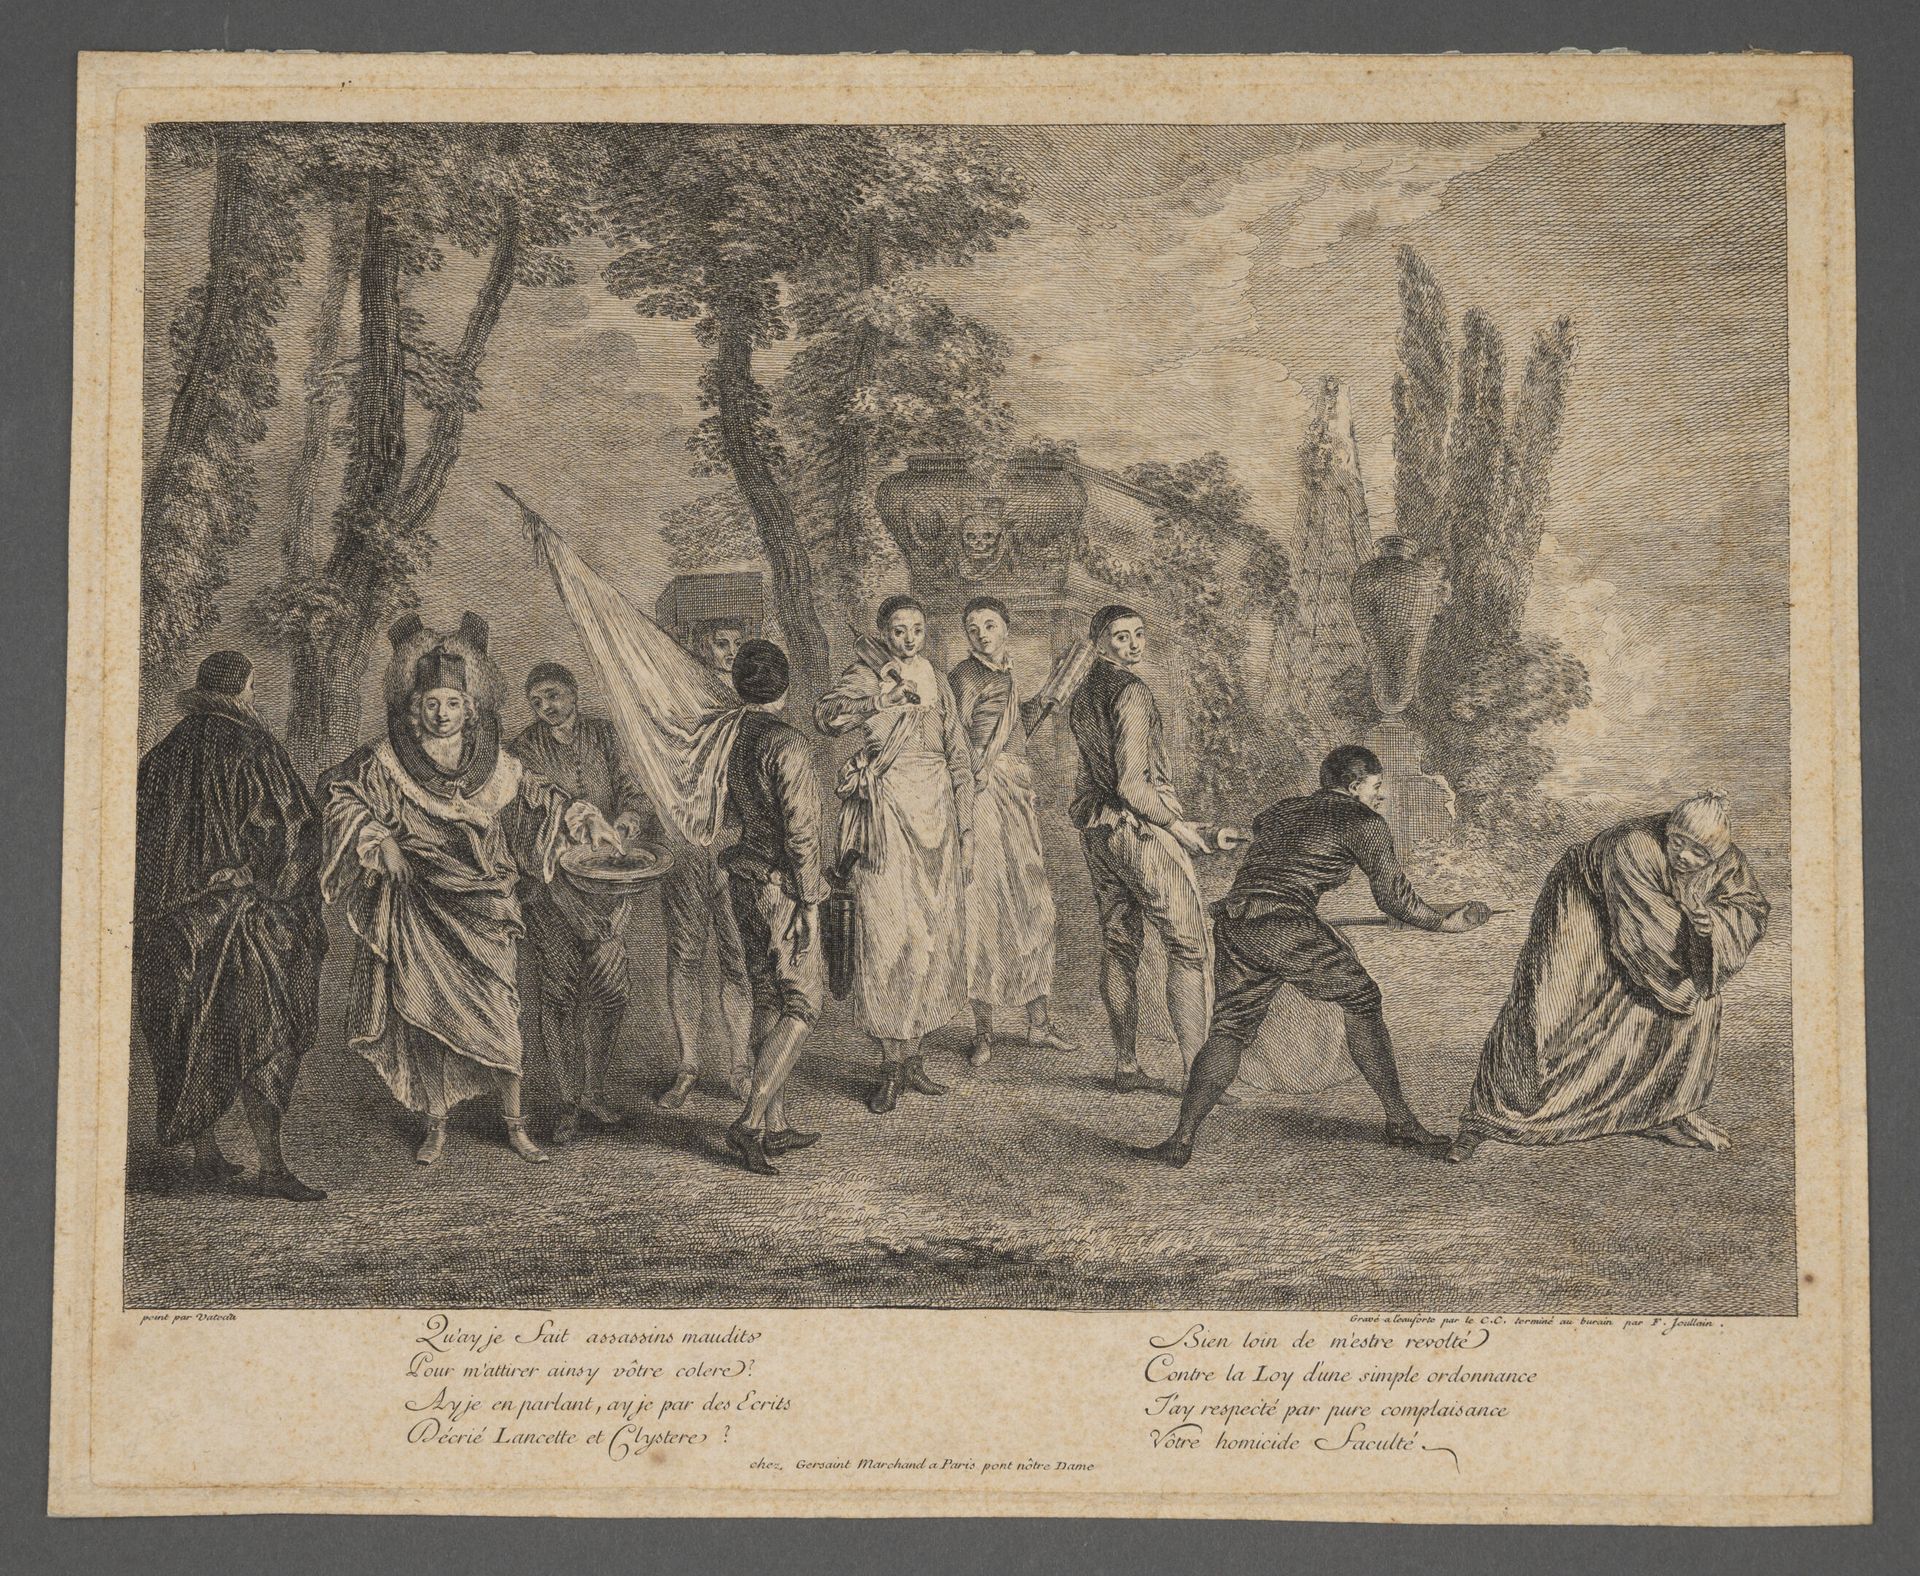 Null After Jean-Antoine WATTEAU (1684-1721)
"What have I done, cursed assassins,&hellip;